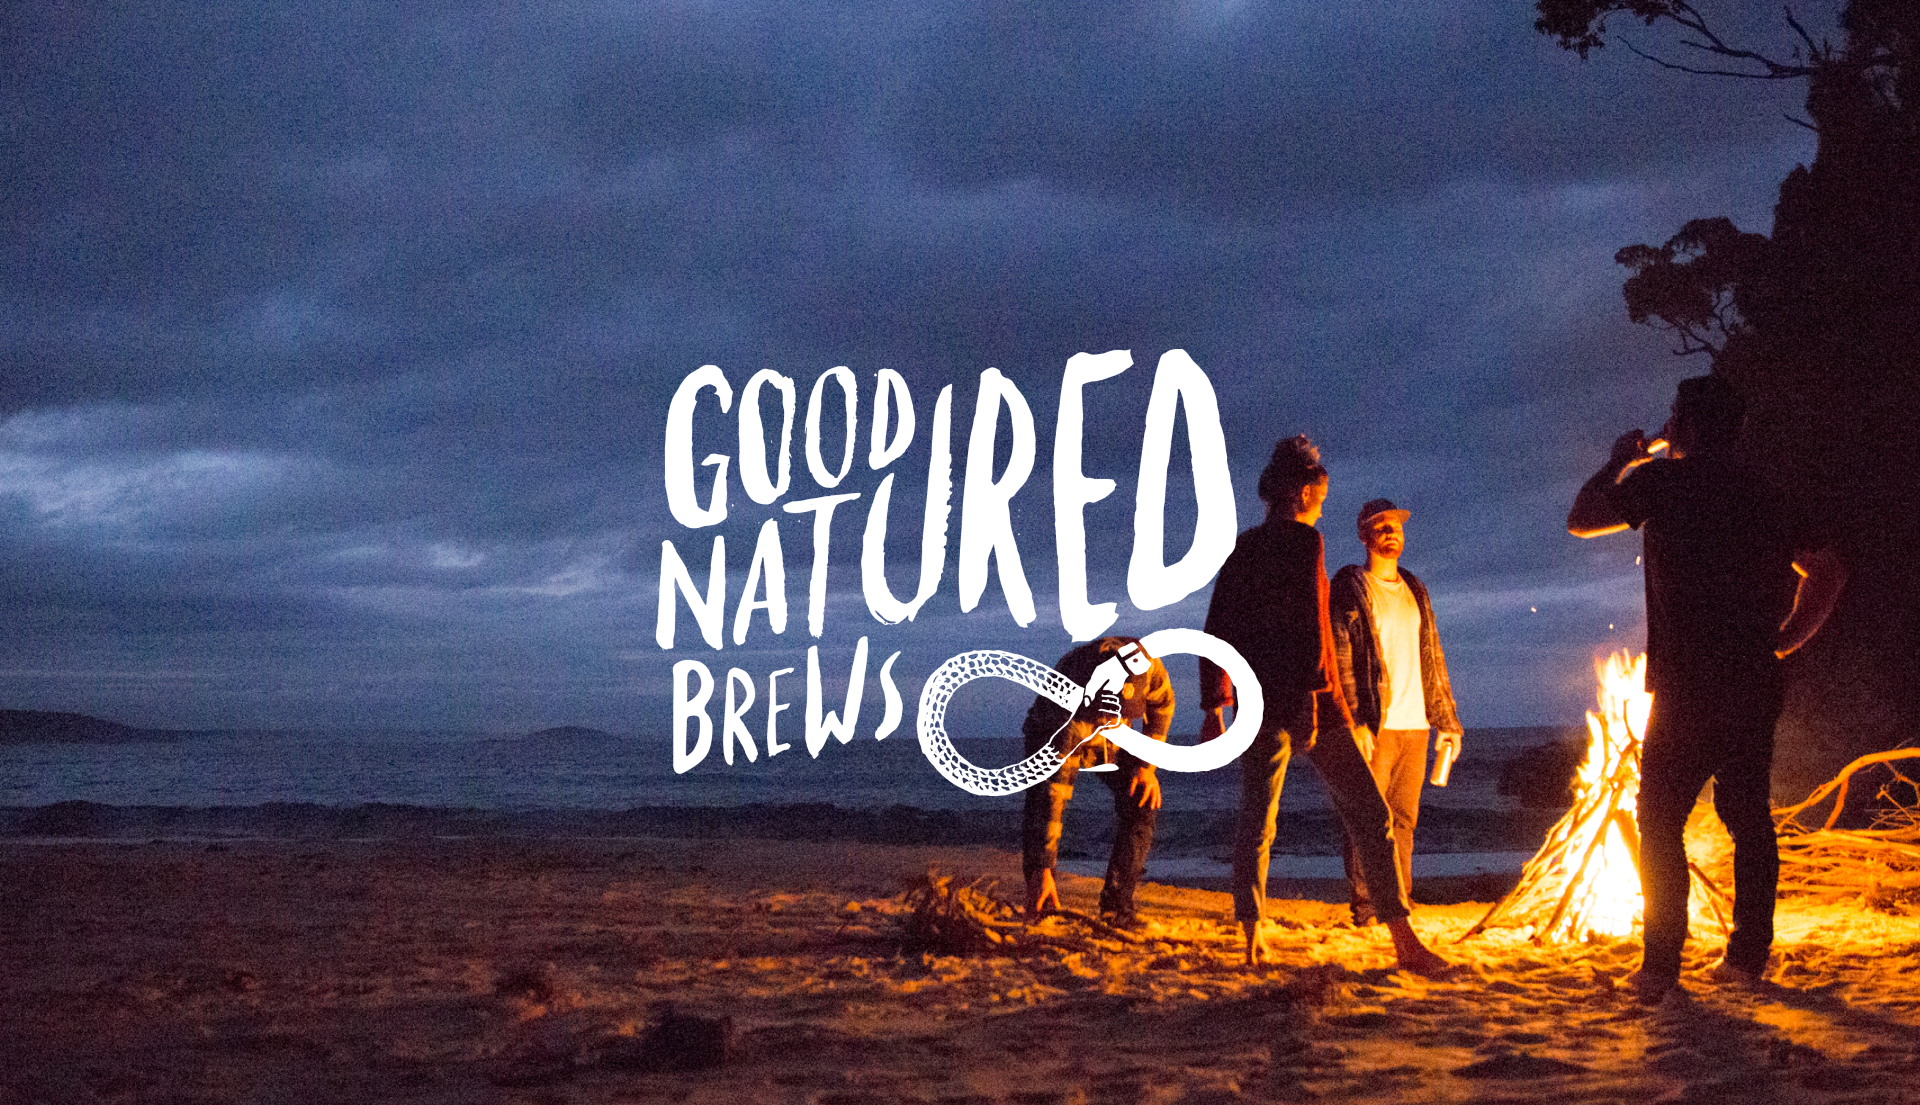 People standing around a bonfire on a beach at night time drinking capital brewing beers. "Good natured Brews" hand lettering overlaid on top of the image.